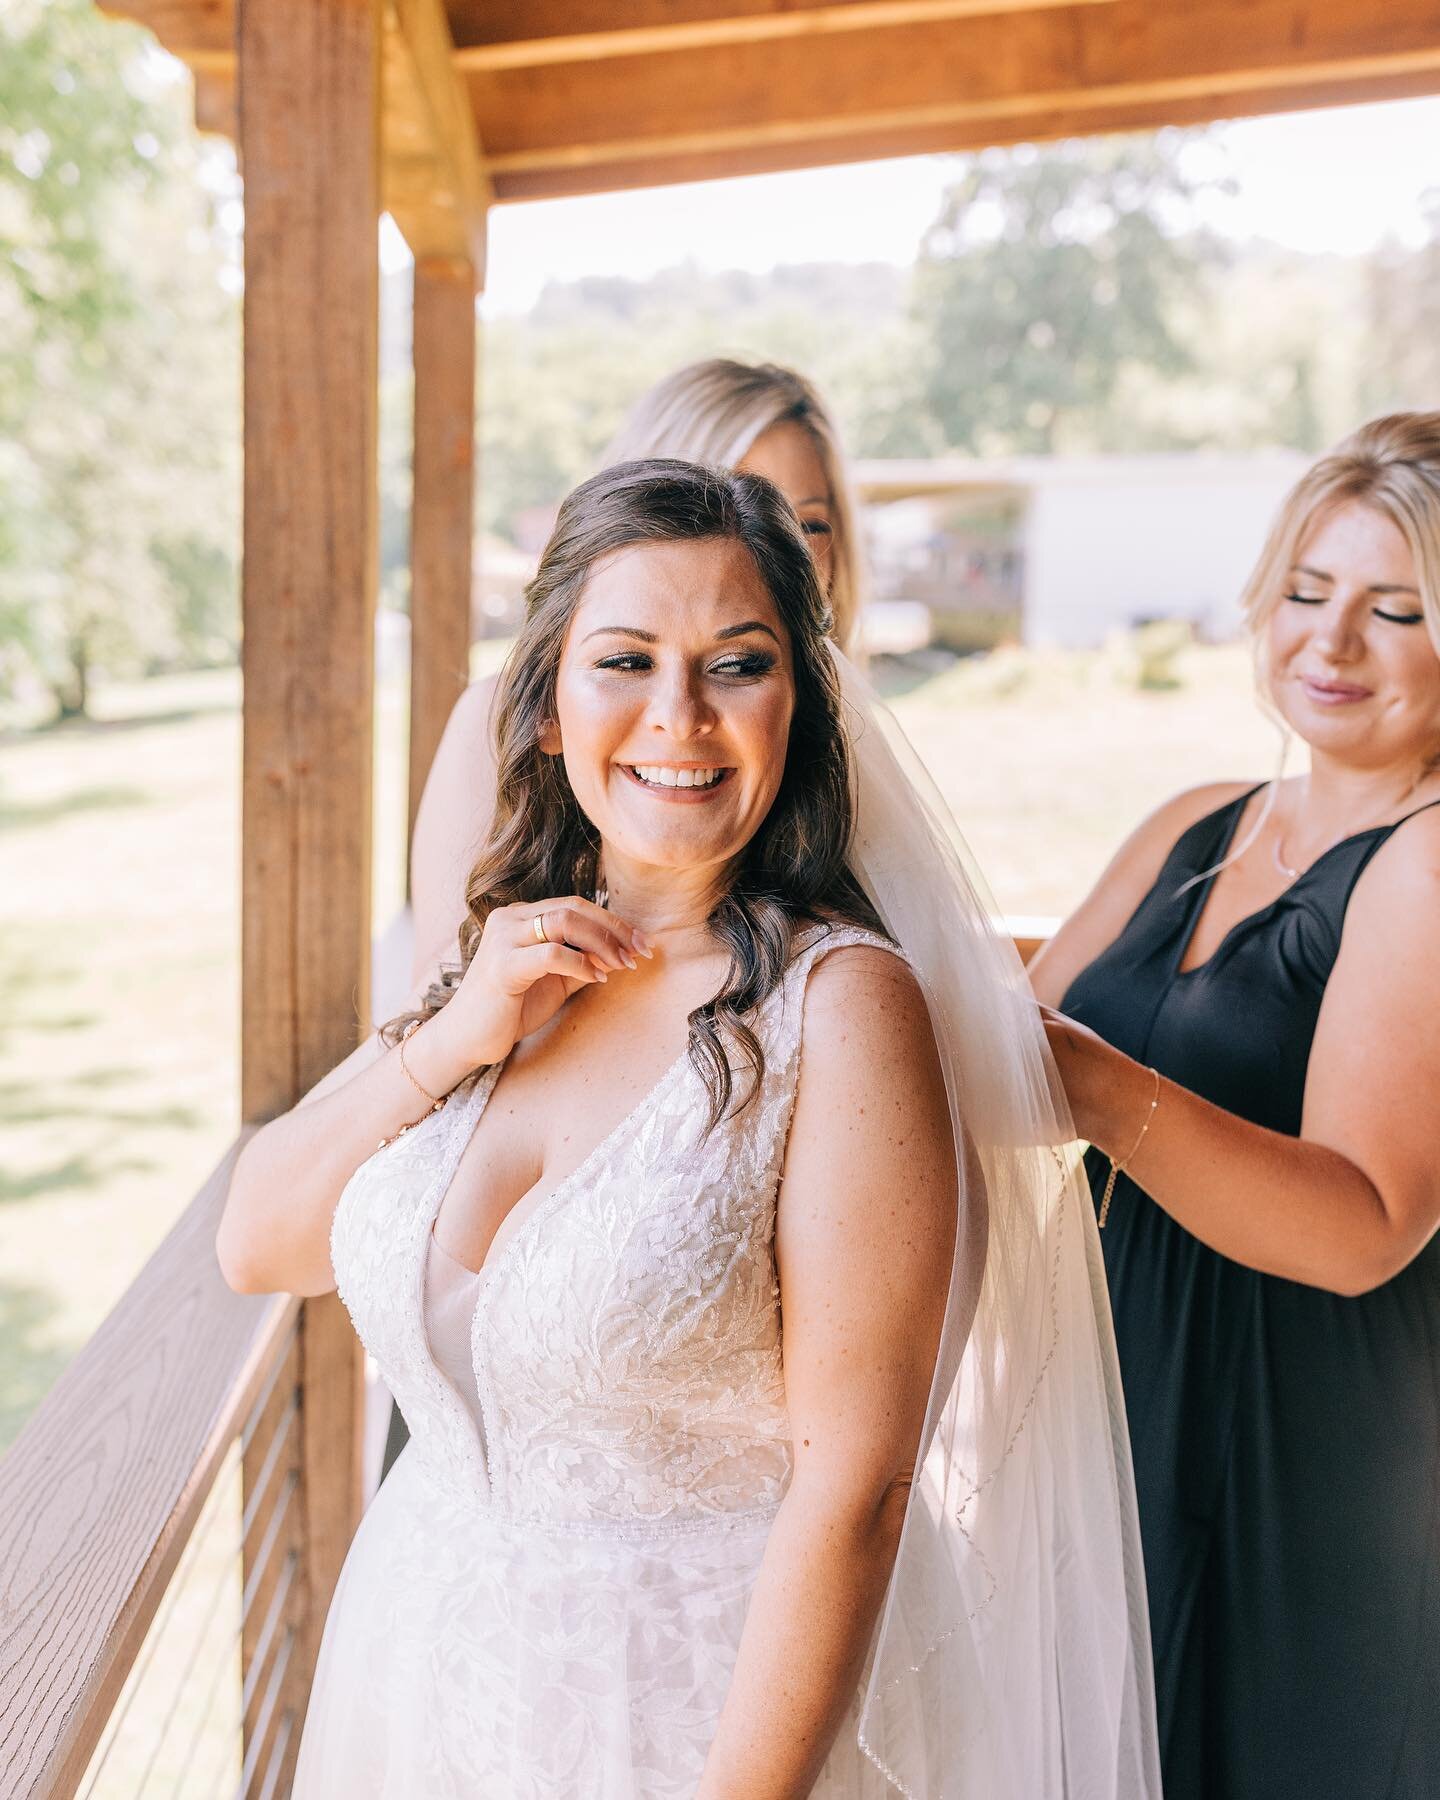 Finishing up Chrislyn and Jonathan&rsquo;s backyard wedding this week! I&rsquo;m feeling all the feelings while editing because the whole day was filled with love, laughter, and a few tears shed in memory of her father. We love the new Mr. And Mrs Ke